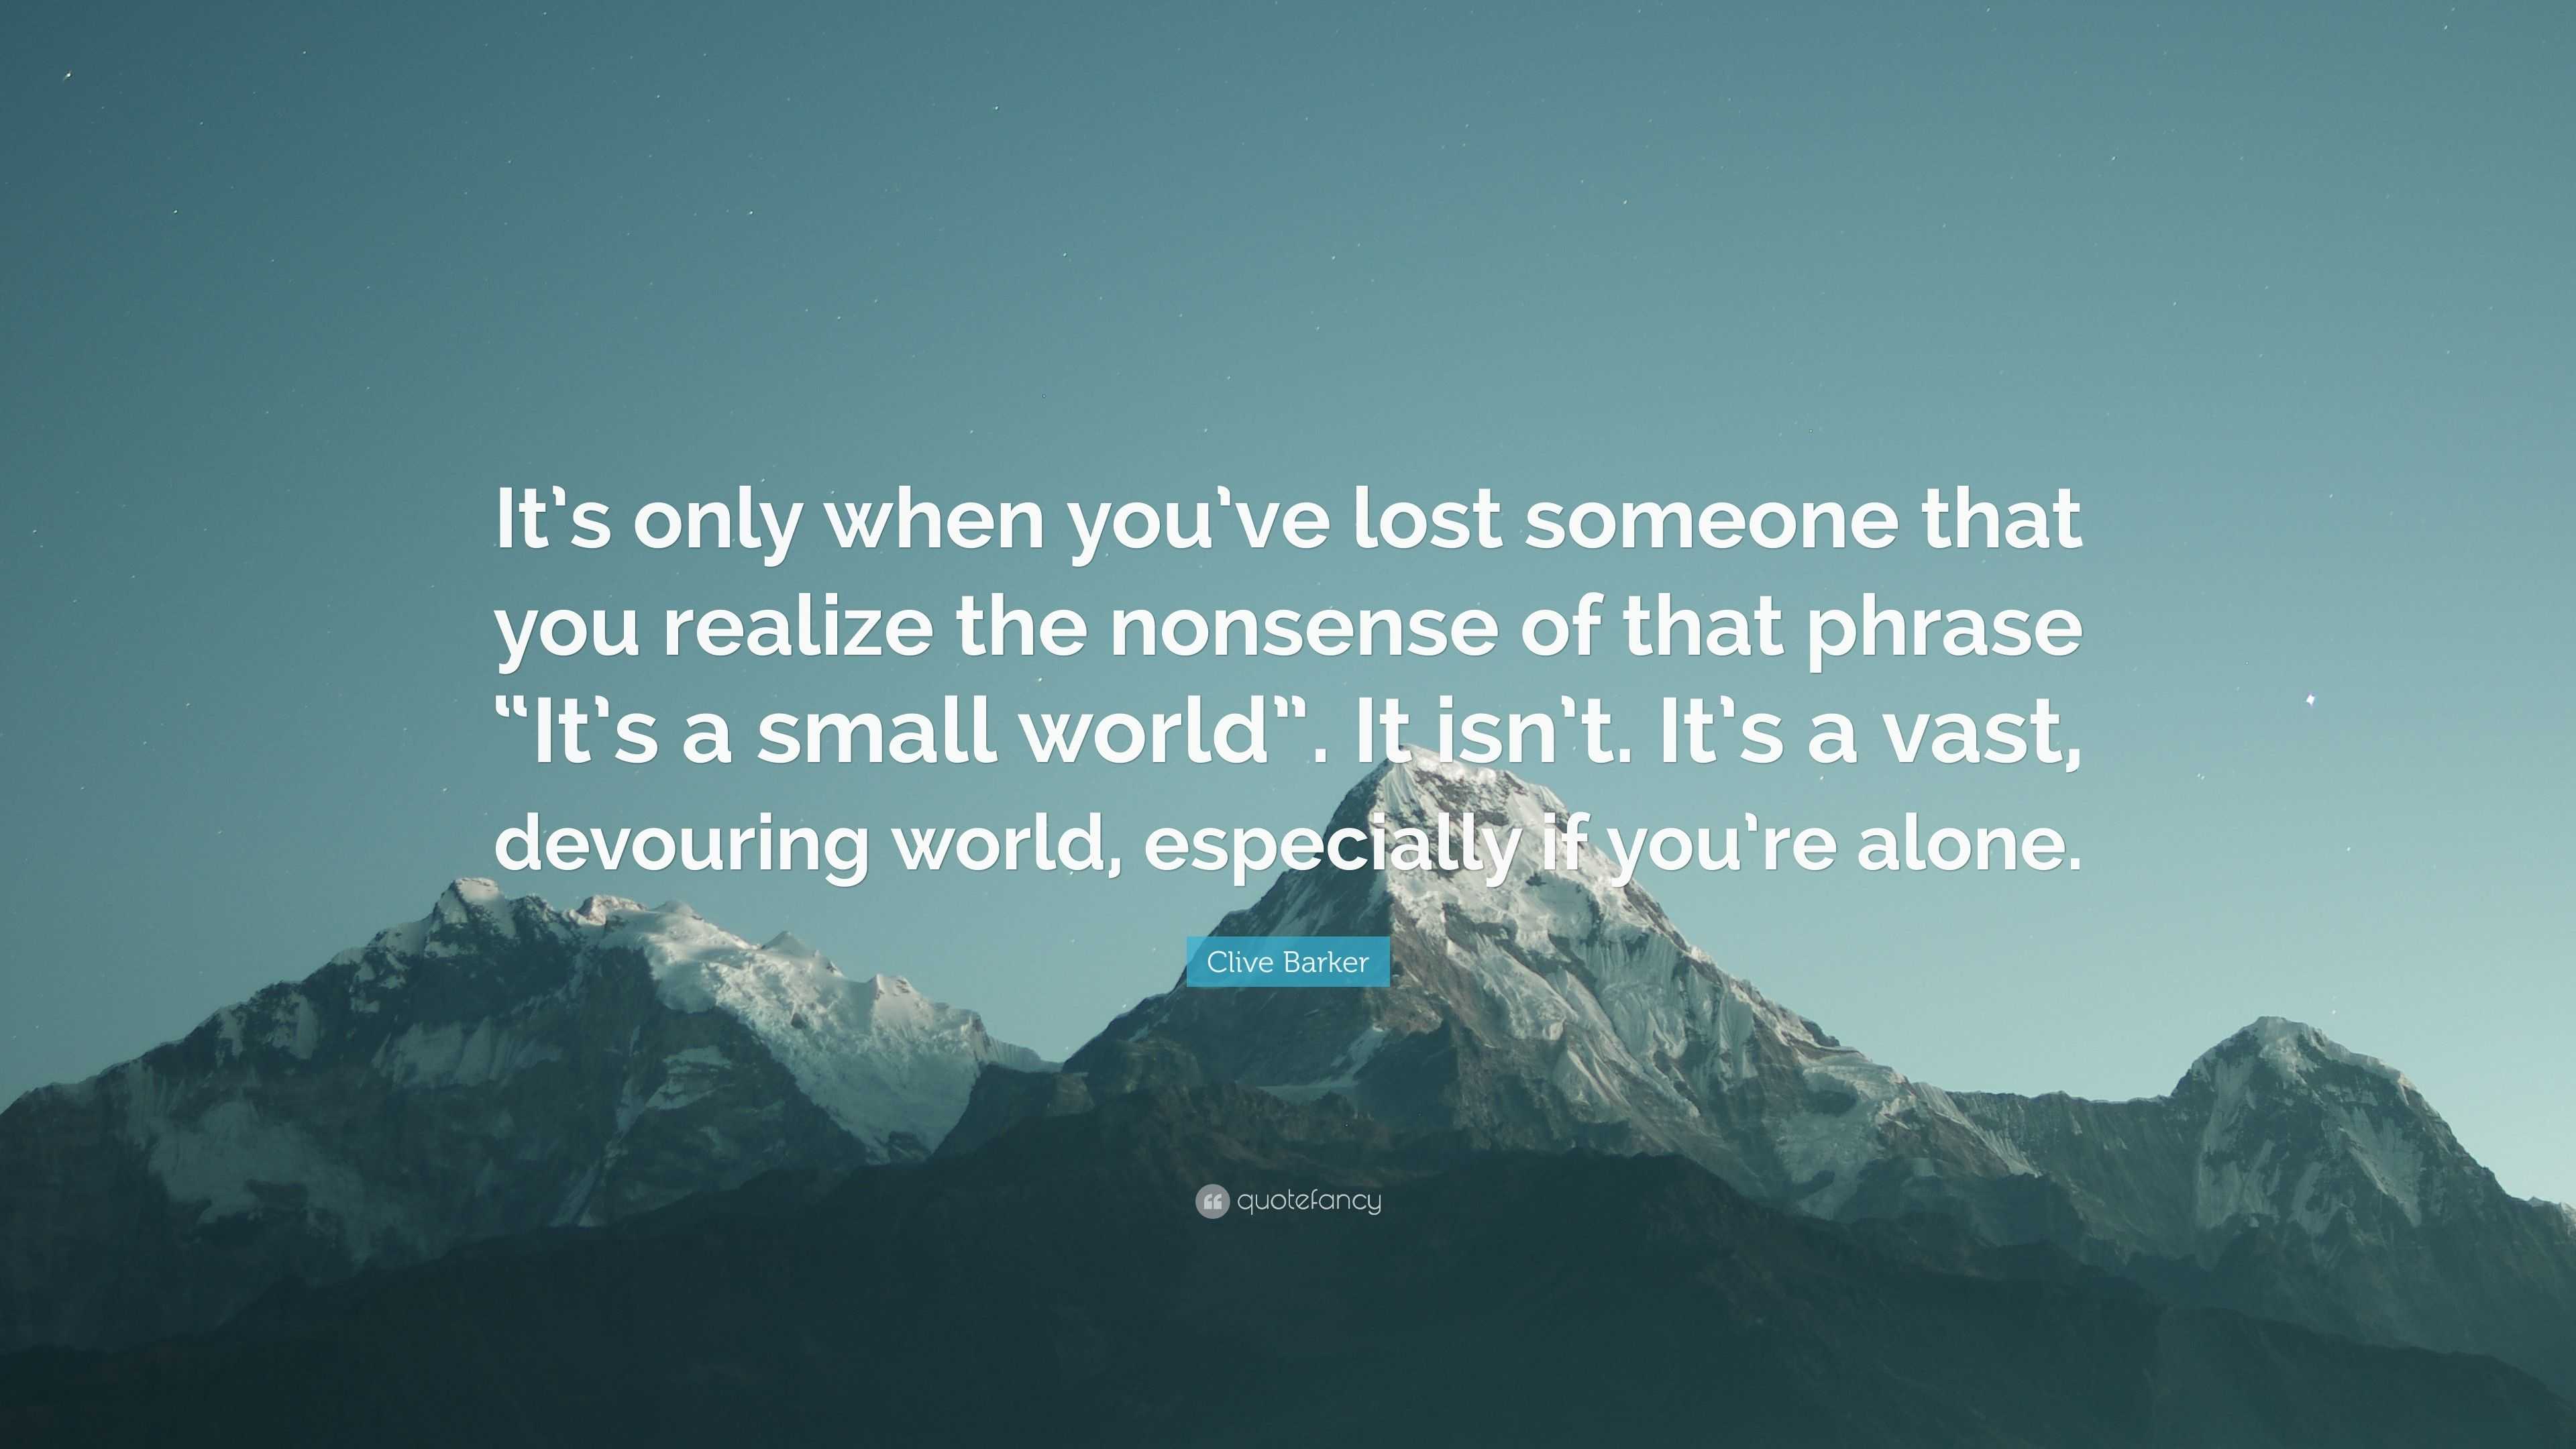 Clive Barker Quote It S Only When You Ve Lost Someone That You Realize The Nonsense Of That Phrase It S A Small World It Isn T It S A V 10 Wallpapers Quotefancy